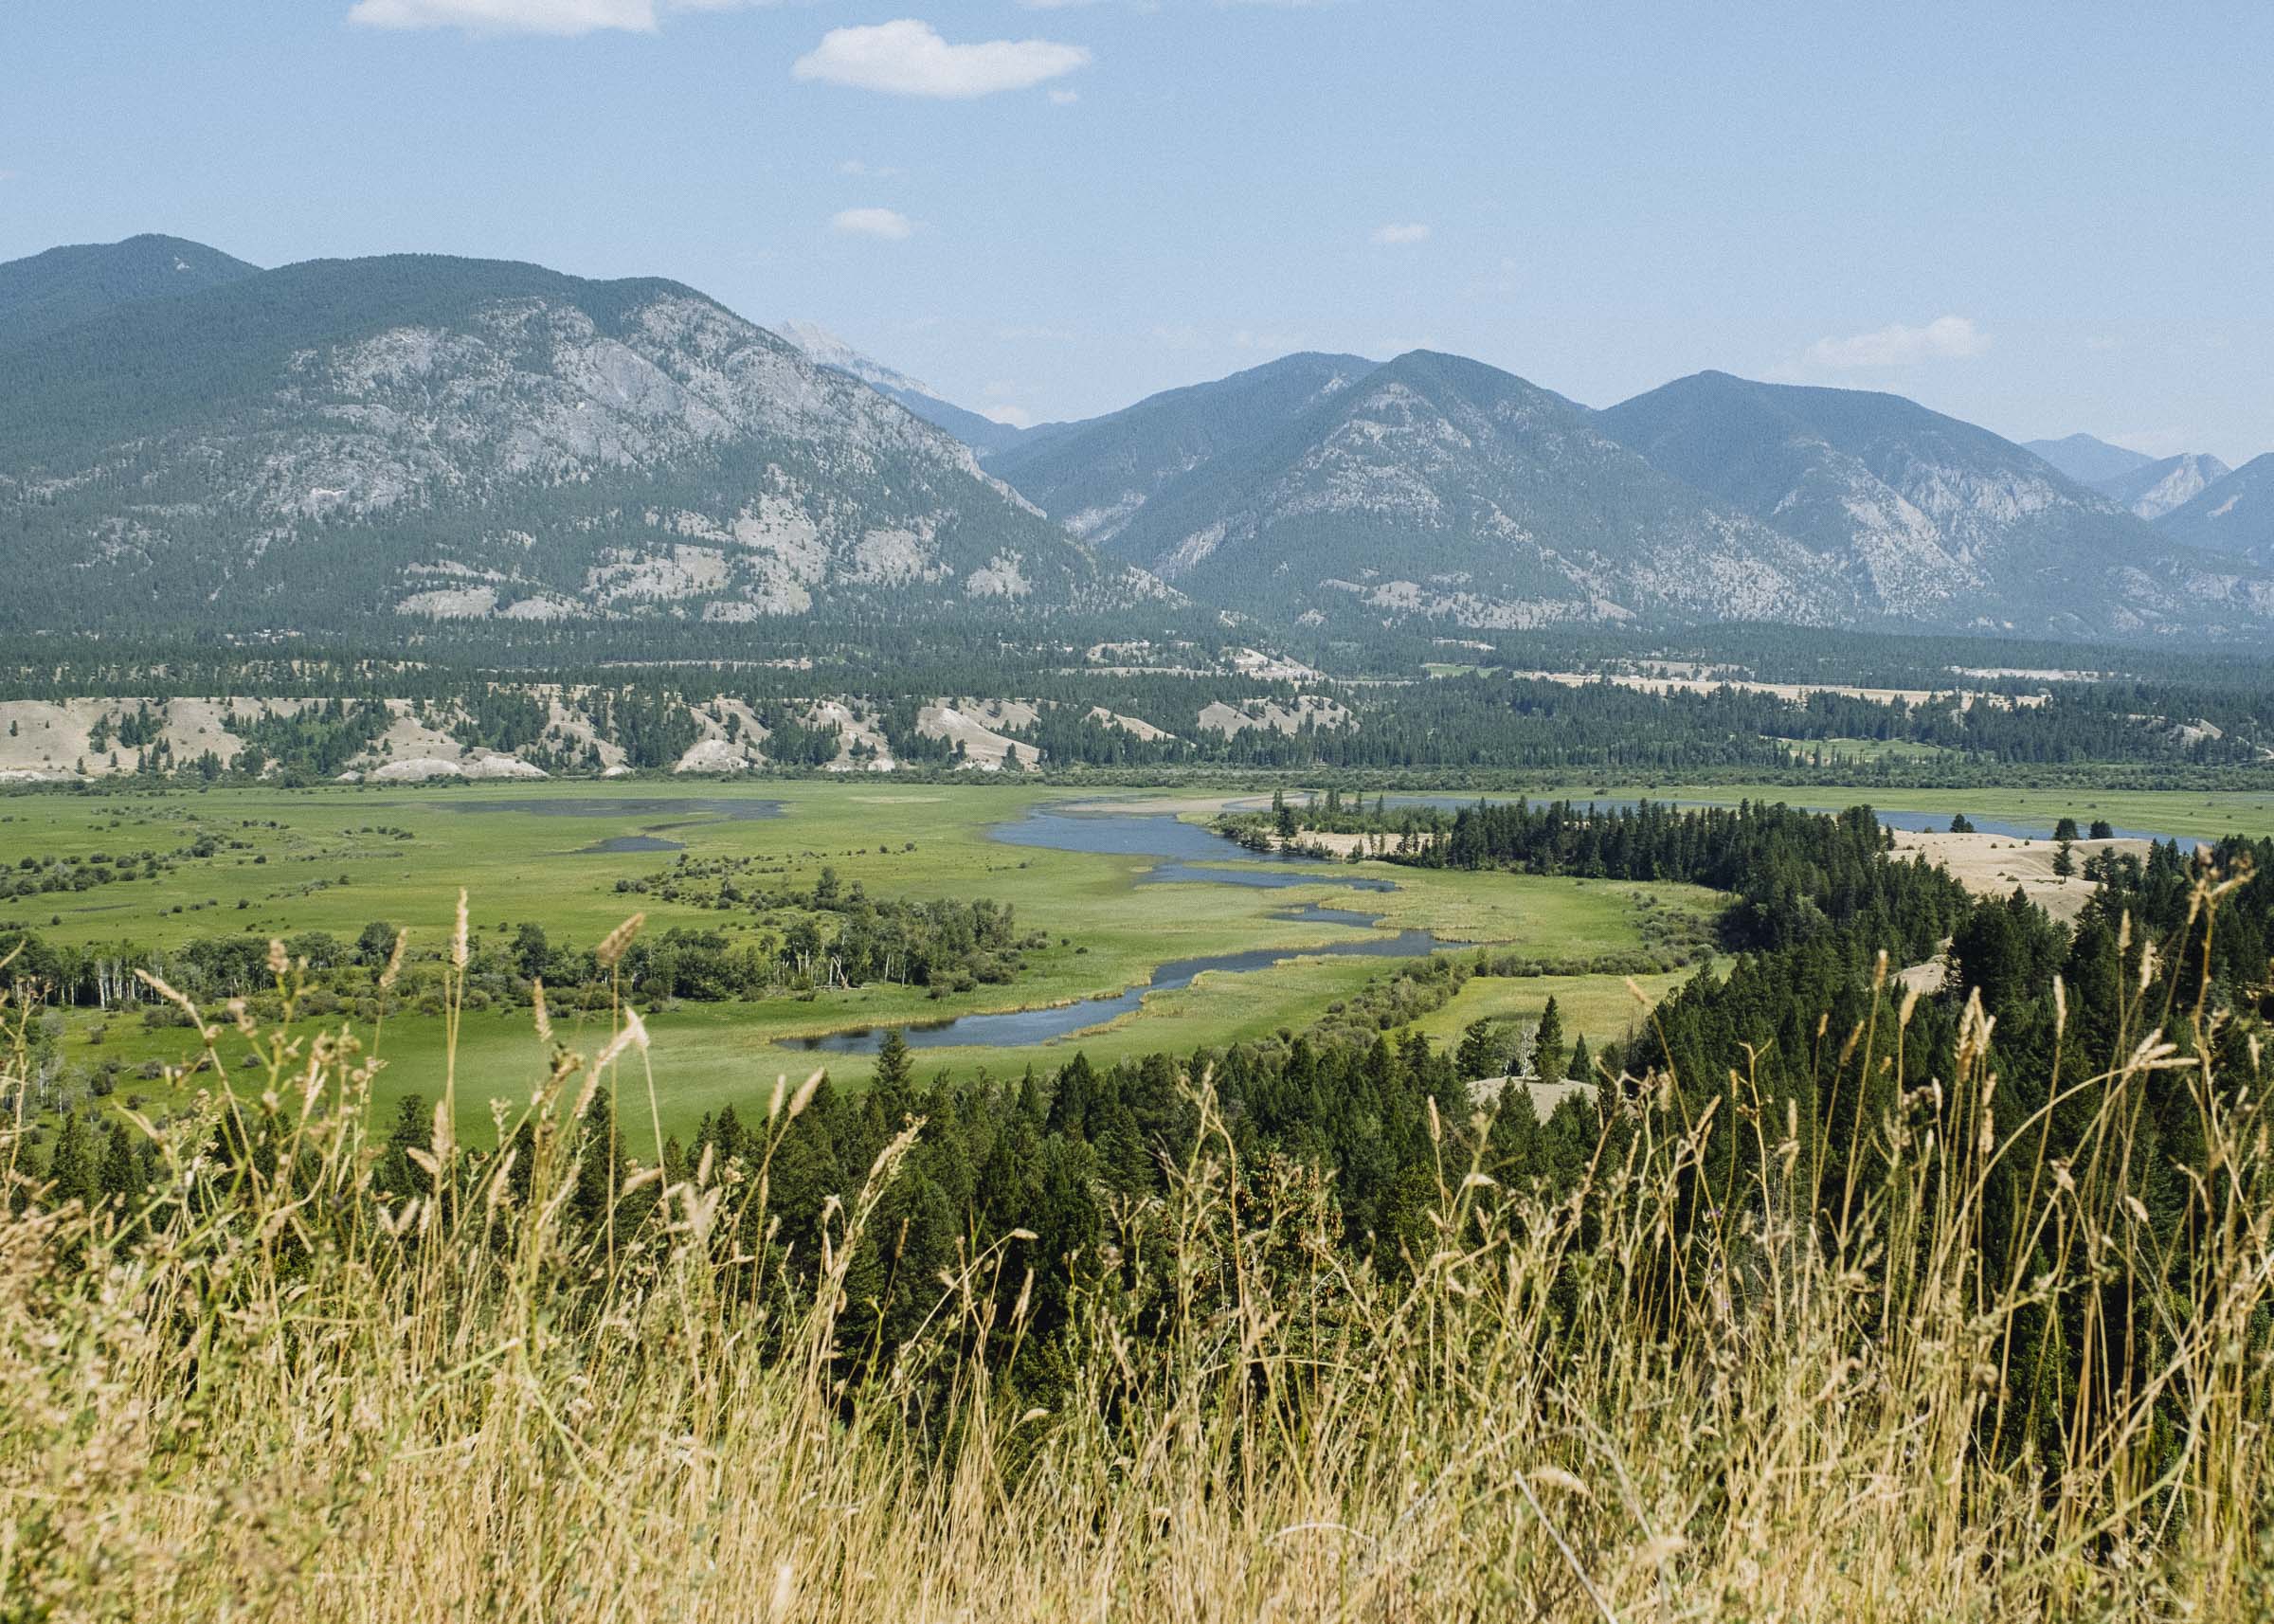 The broad mountainous upper Columbia Valley in the Kootenays